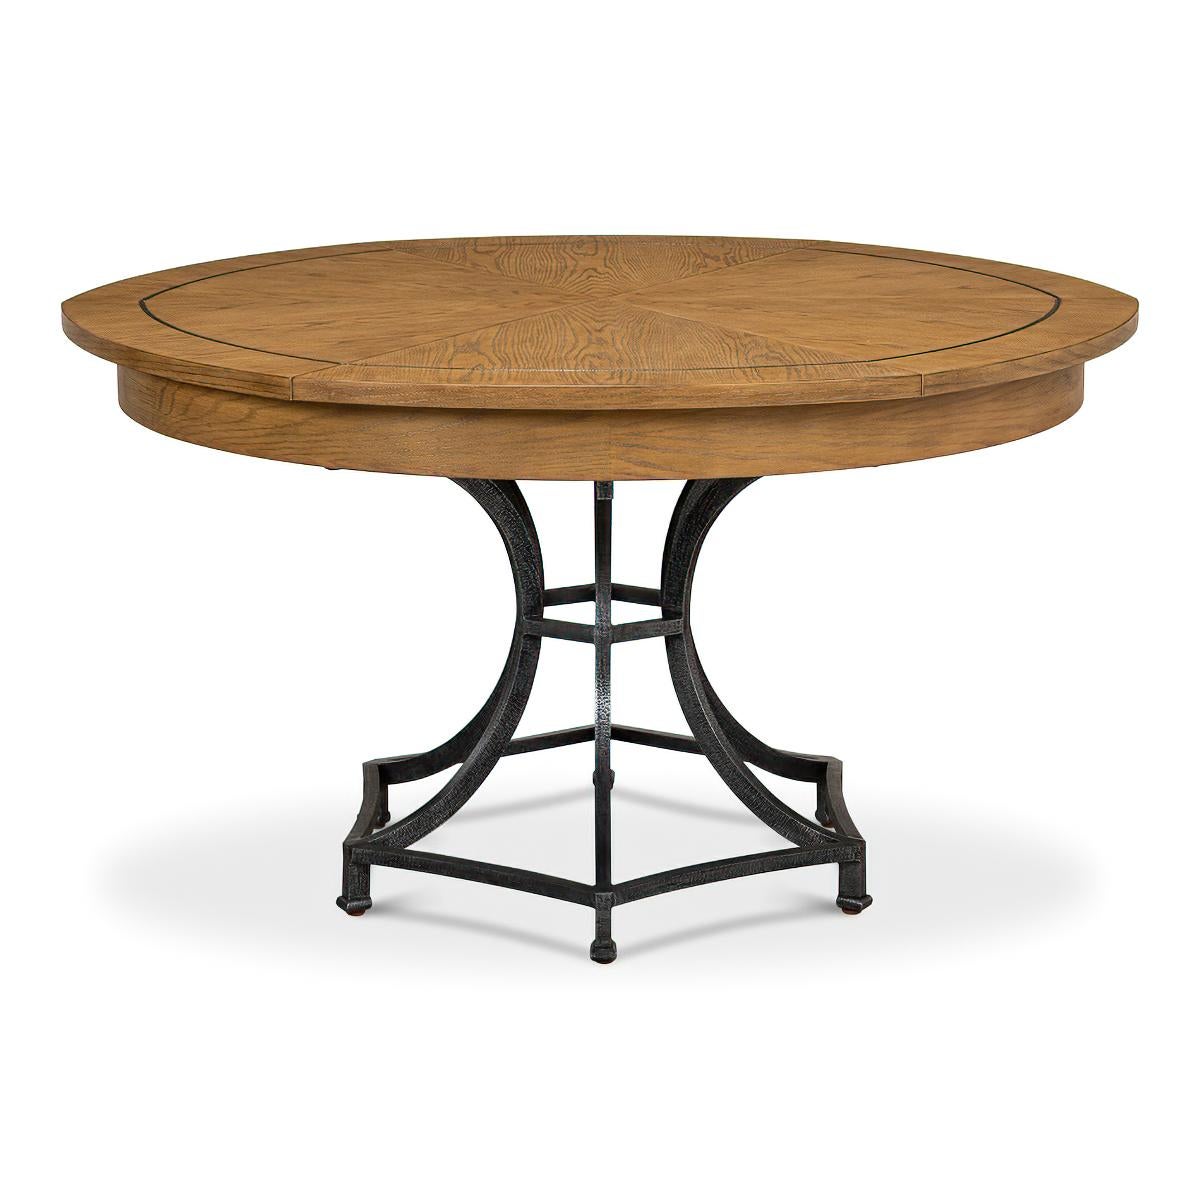 A Modern Industrial style round extending dining table. Featuring a warm beige finish oak top with dark hammered metal inlays on a dark metal pedestal column base.

Open dimensions: 70